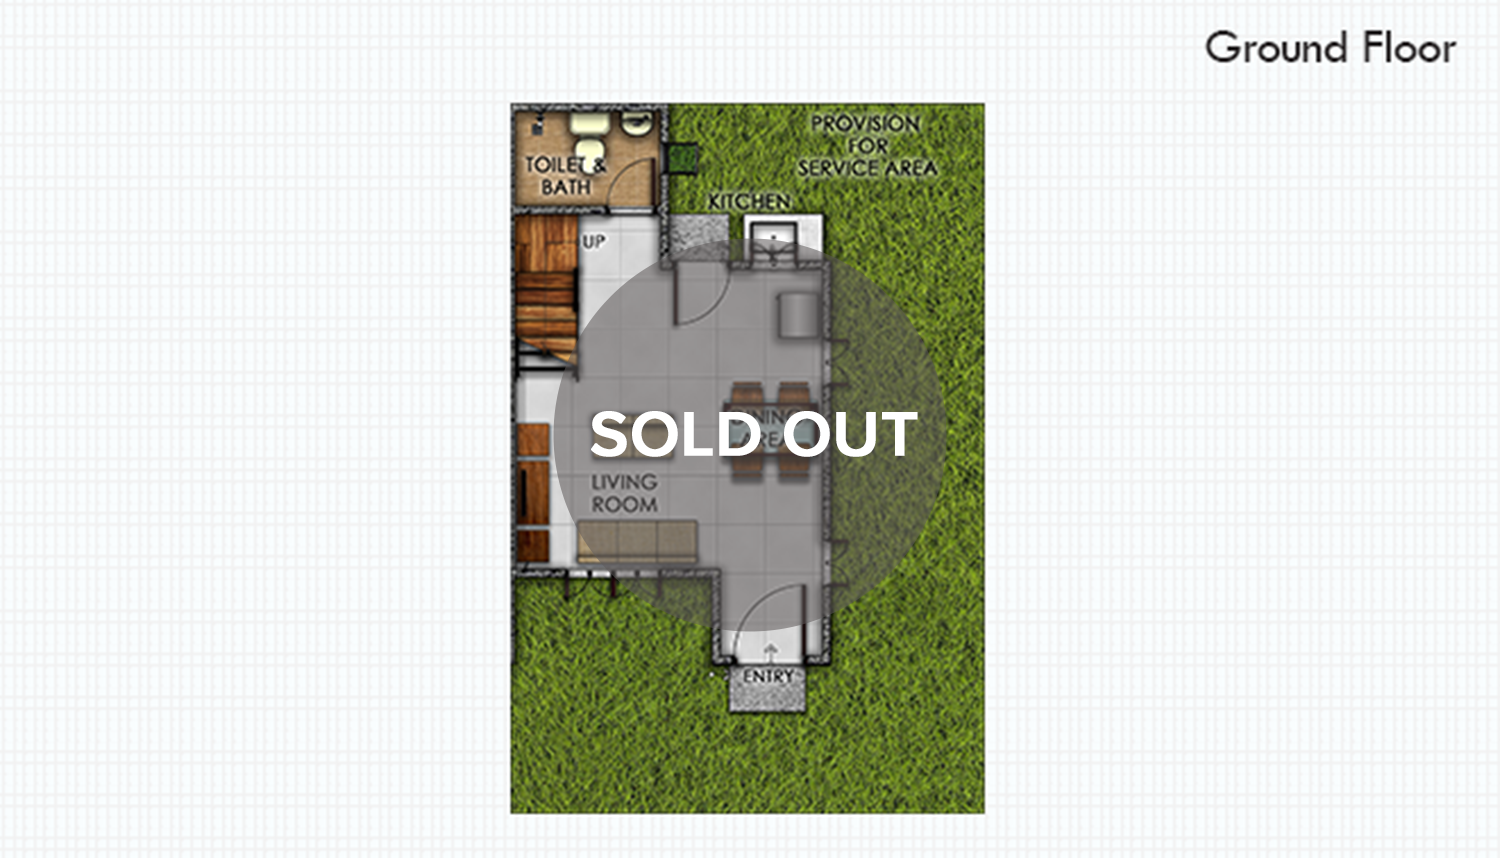 /assets/properties-house-model-gallery-and-landmarks-icons/lumina-home-models/home-model-gallery/armina-duplex/armina-duplex-ground-floor-plan-sold-out.png